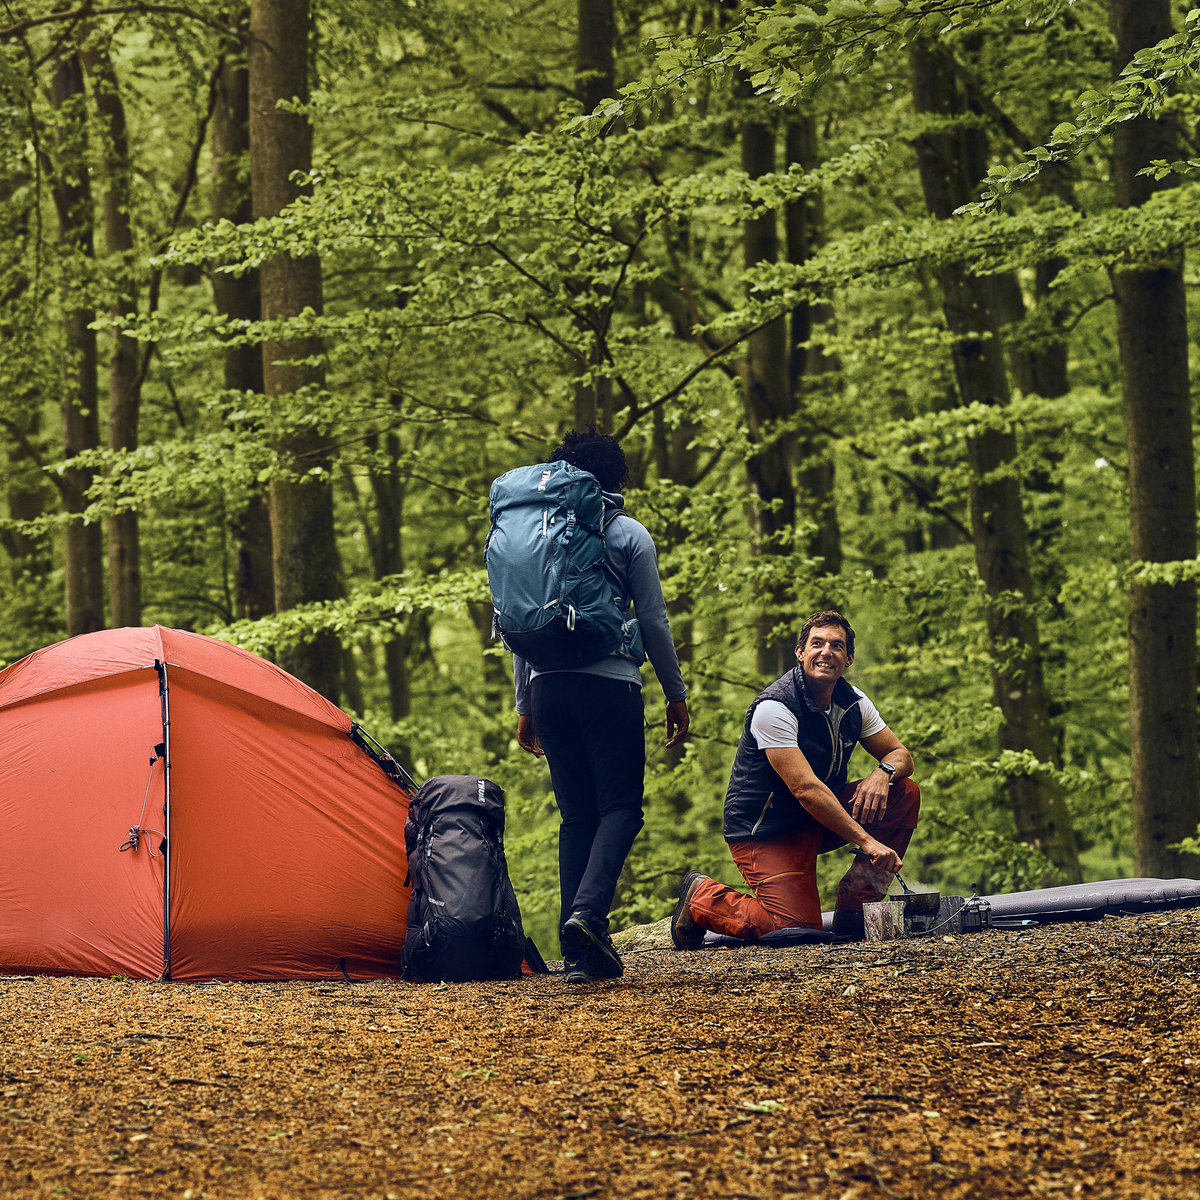 Two people go camping in the woods, carrying Thule Versant hiking backpacks.